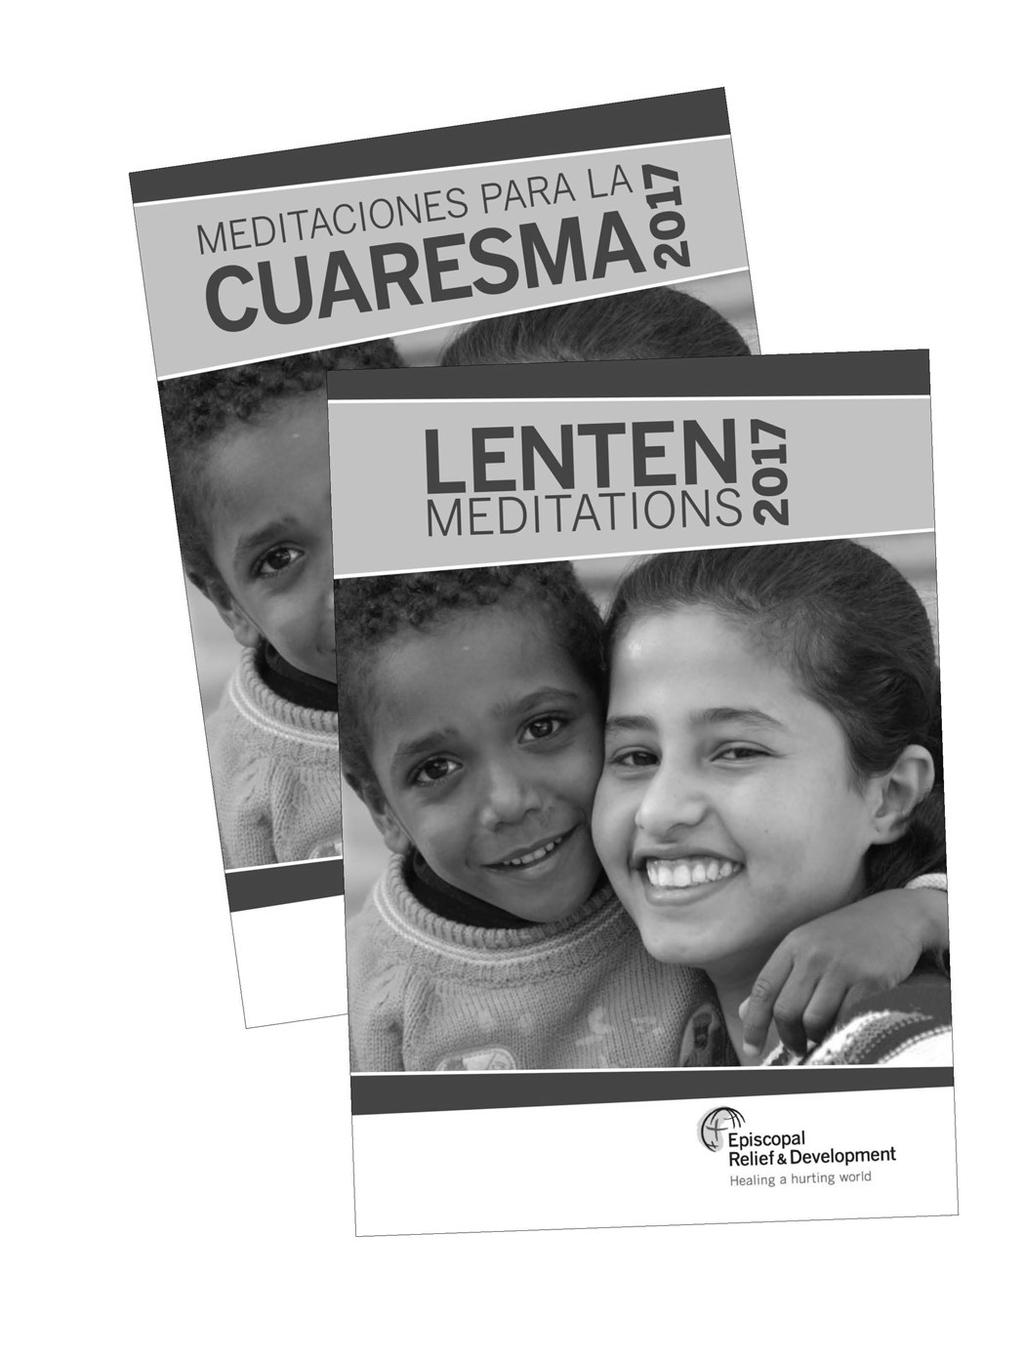 2017 Lenten Meditation Guide from Episcopal Relief & Development Episcopal Relief and Development, the humanitarian outreach arm of the Episcopal Church, has published a collection of new Lenten